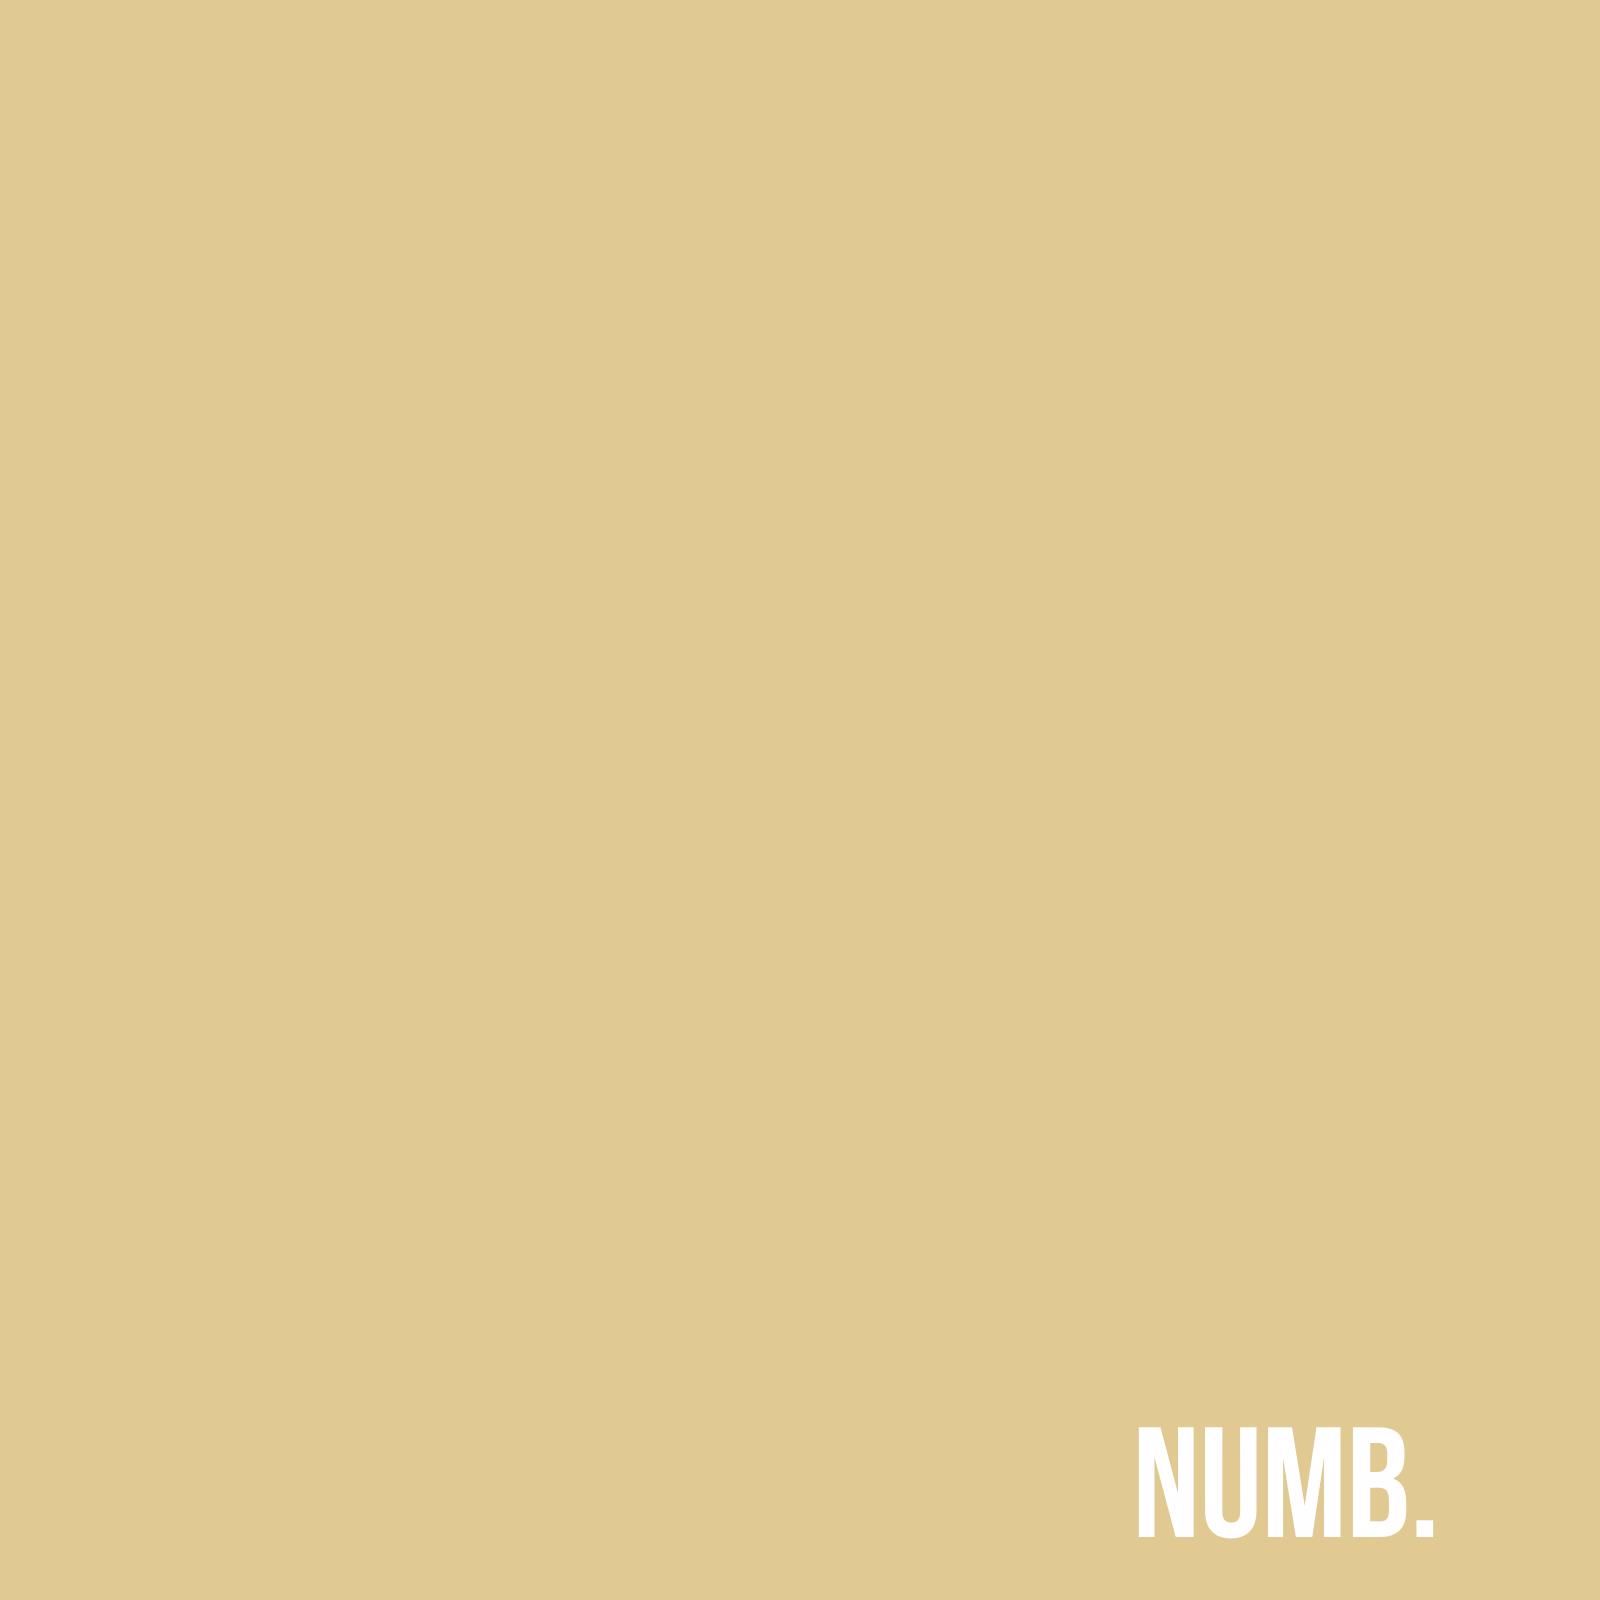 Unduh numb [prod. by aftertheparty]